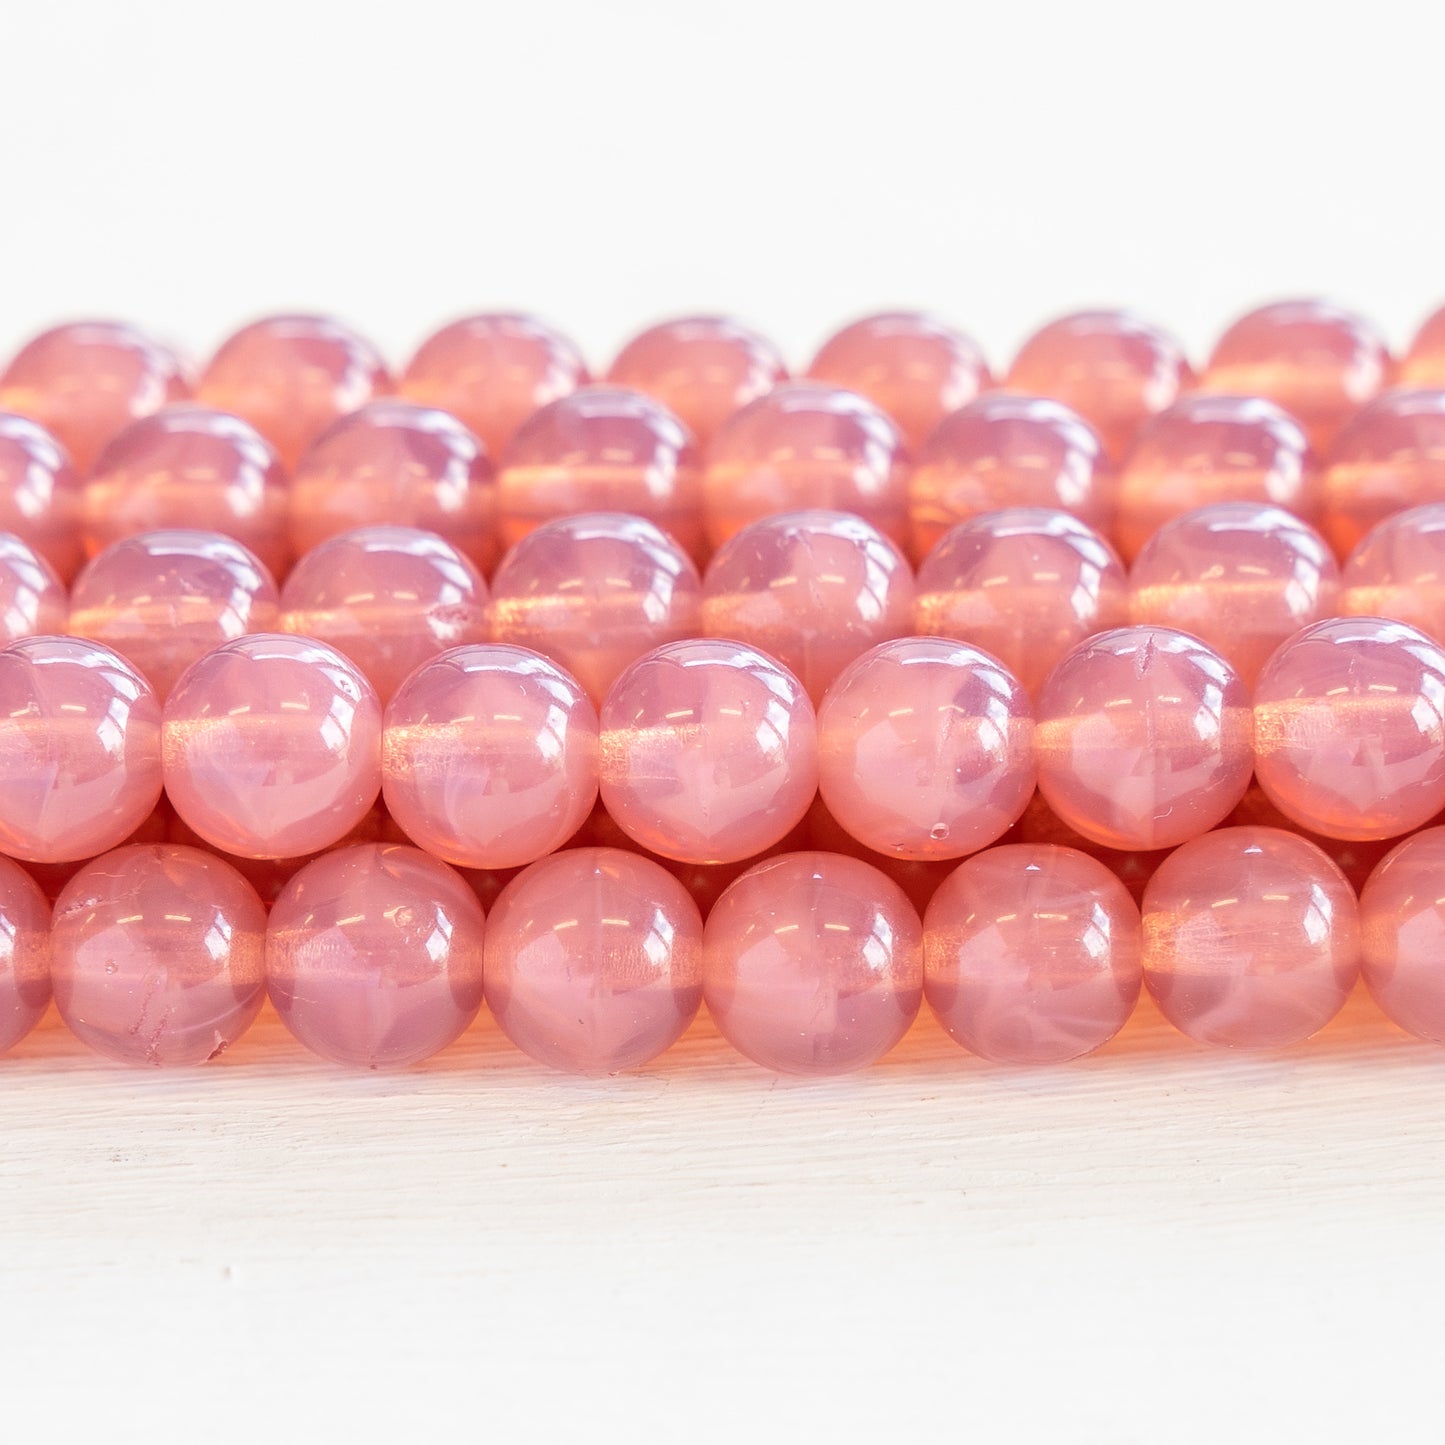 8mm Round Glass Beads - Opaline Pink Rose - 32 Beads